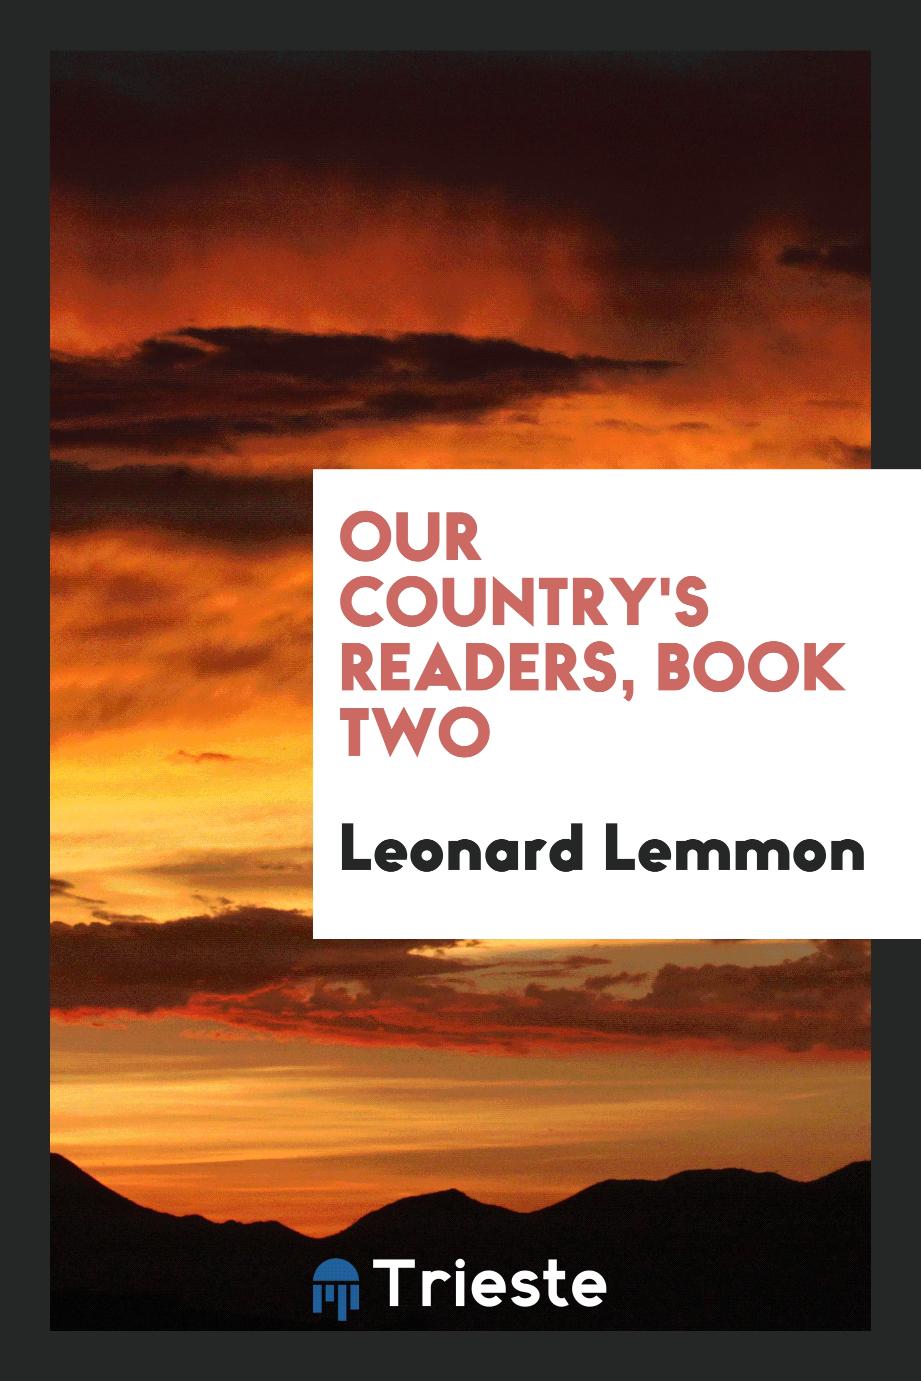 Our Country's Readers, Book Two